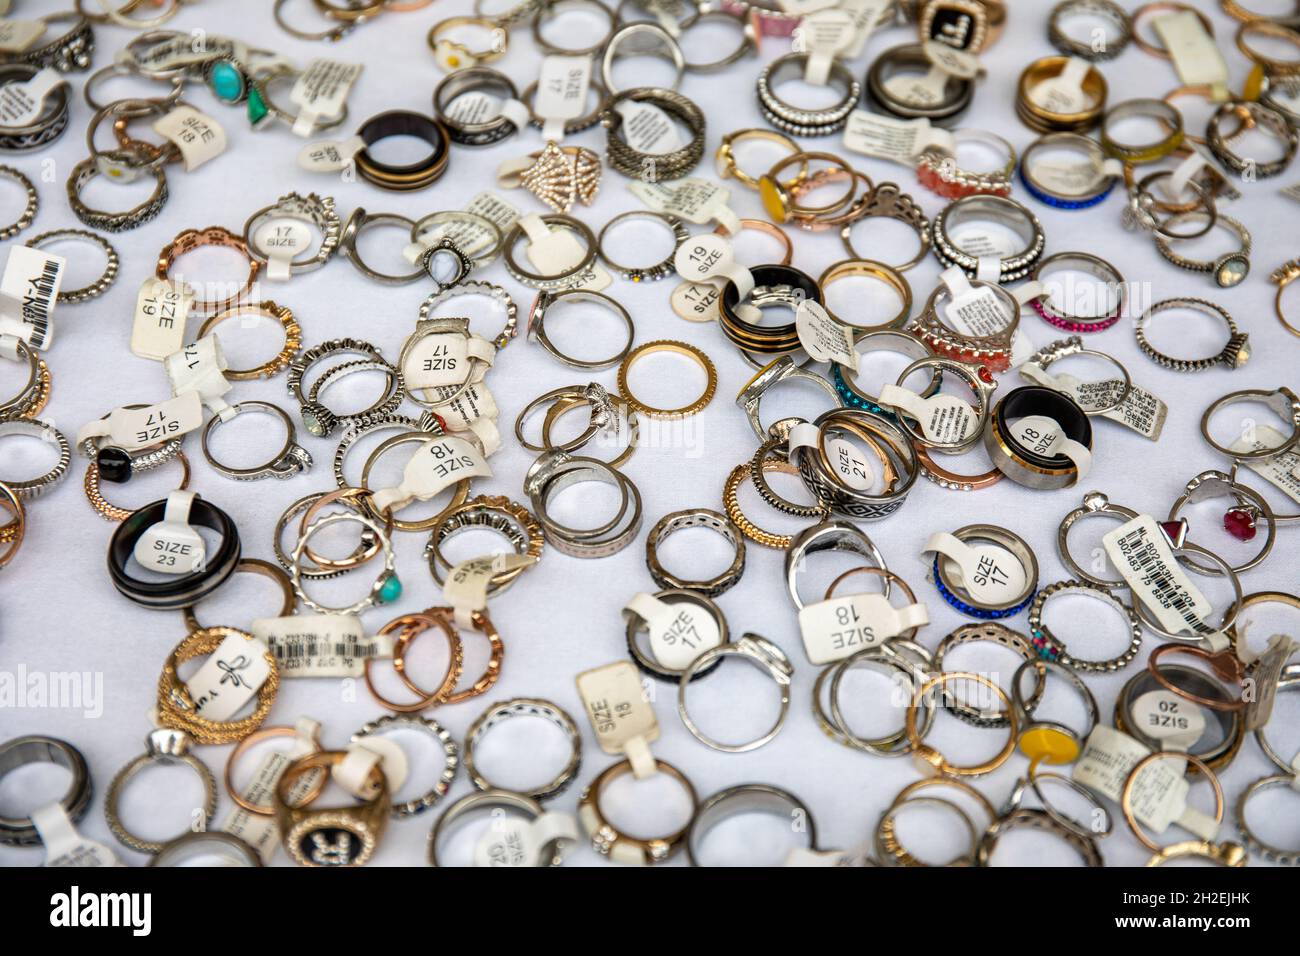 Assortment of rings on sale at Mercato di Porta Portese Sunday street market in Trastevere district of Rome, Italy Stock Photo